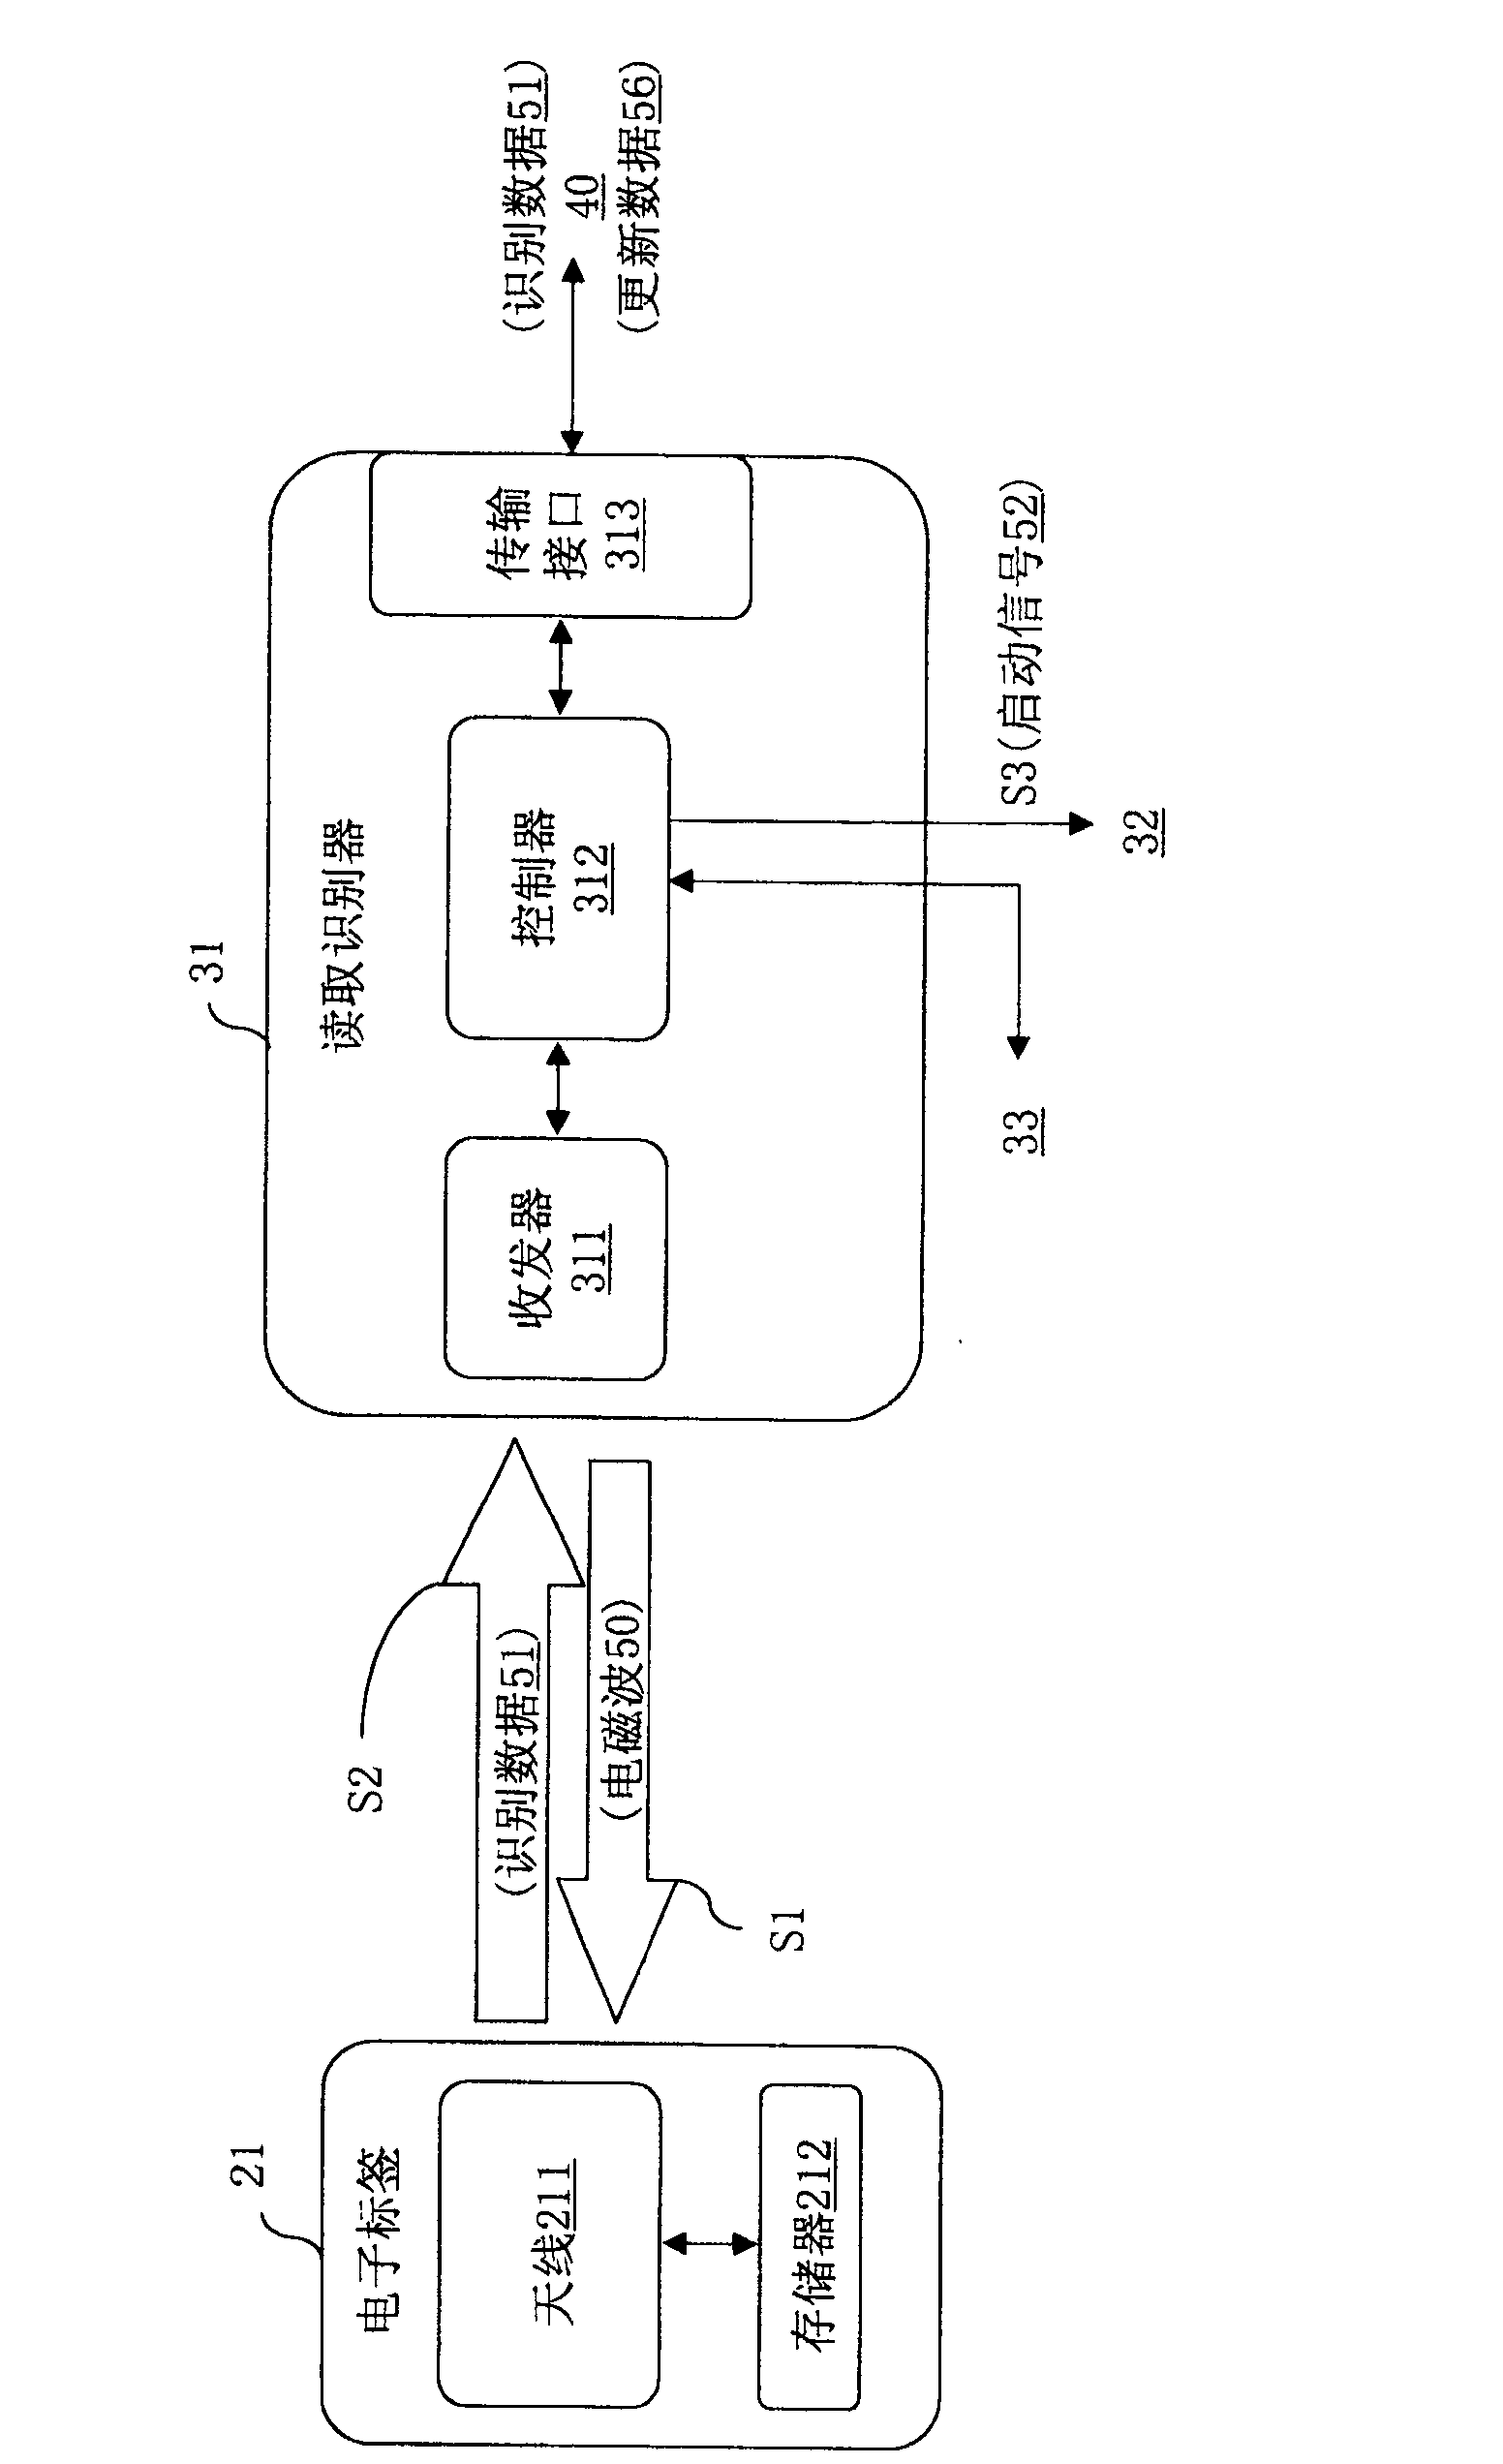 Electric vehicle power management system and method